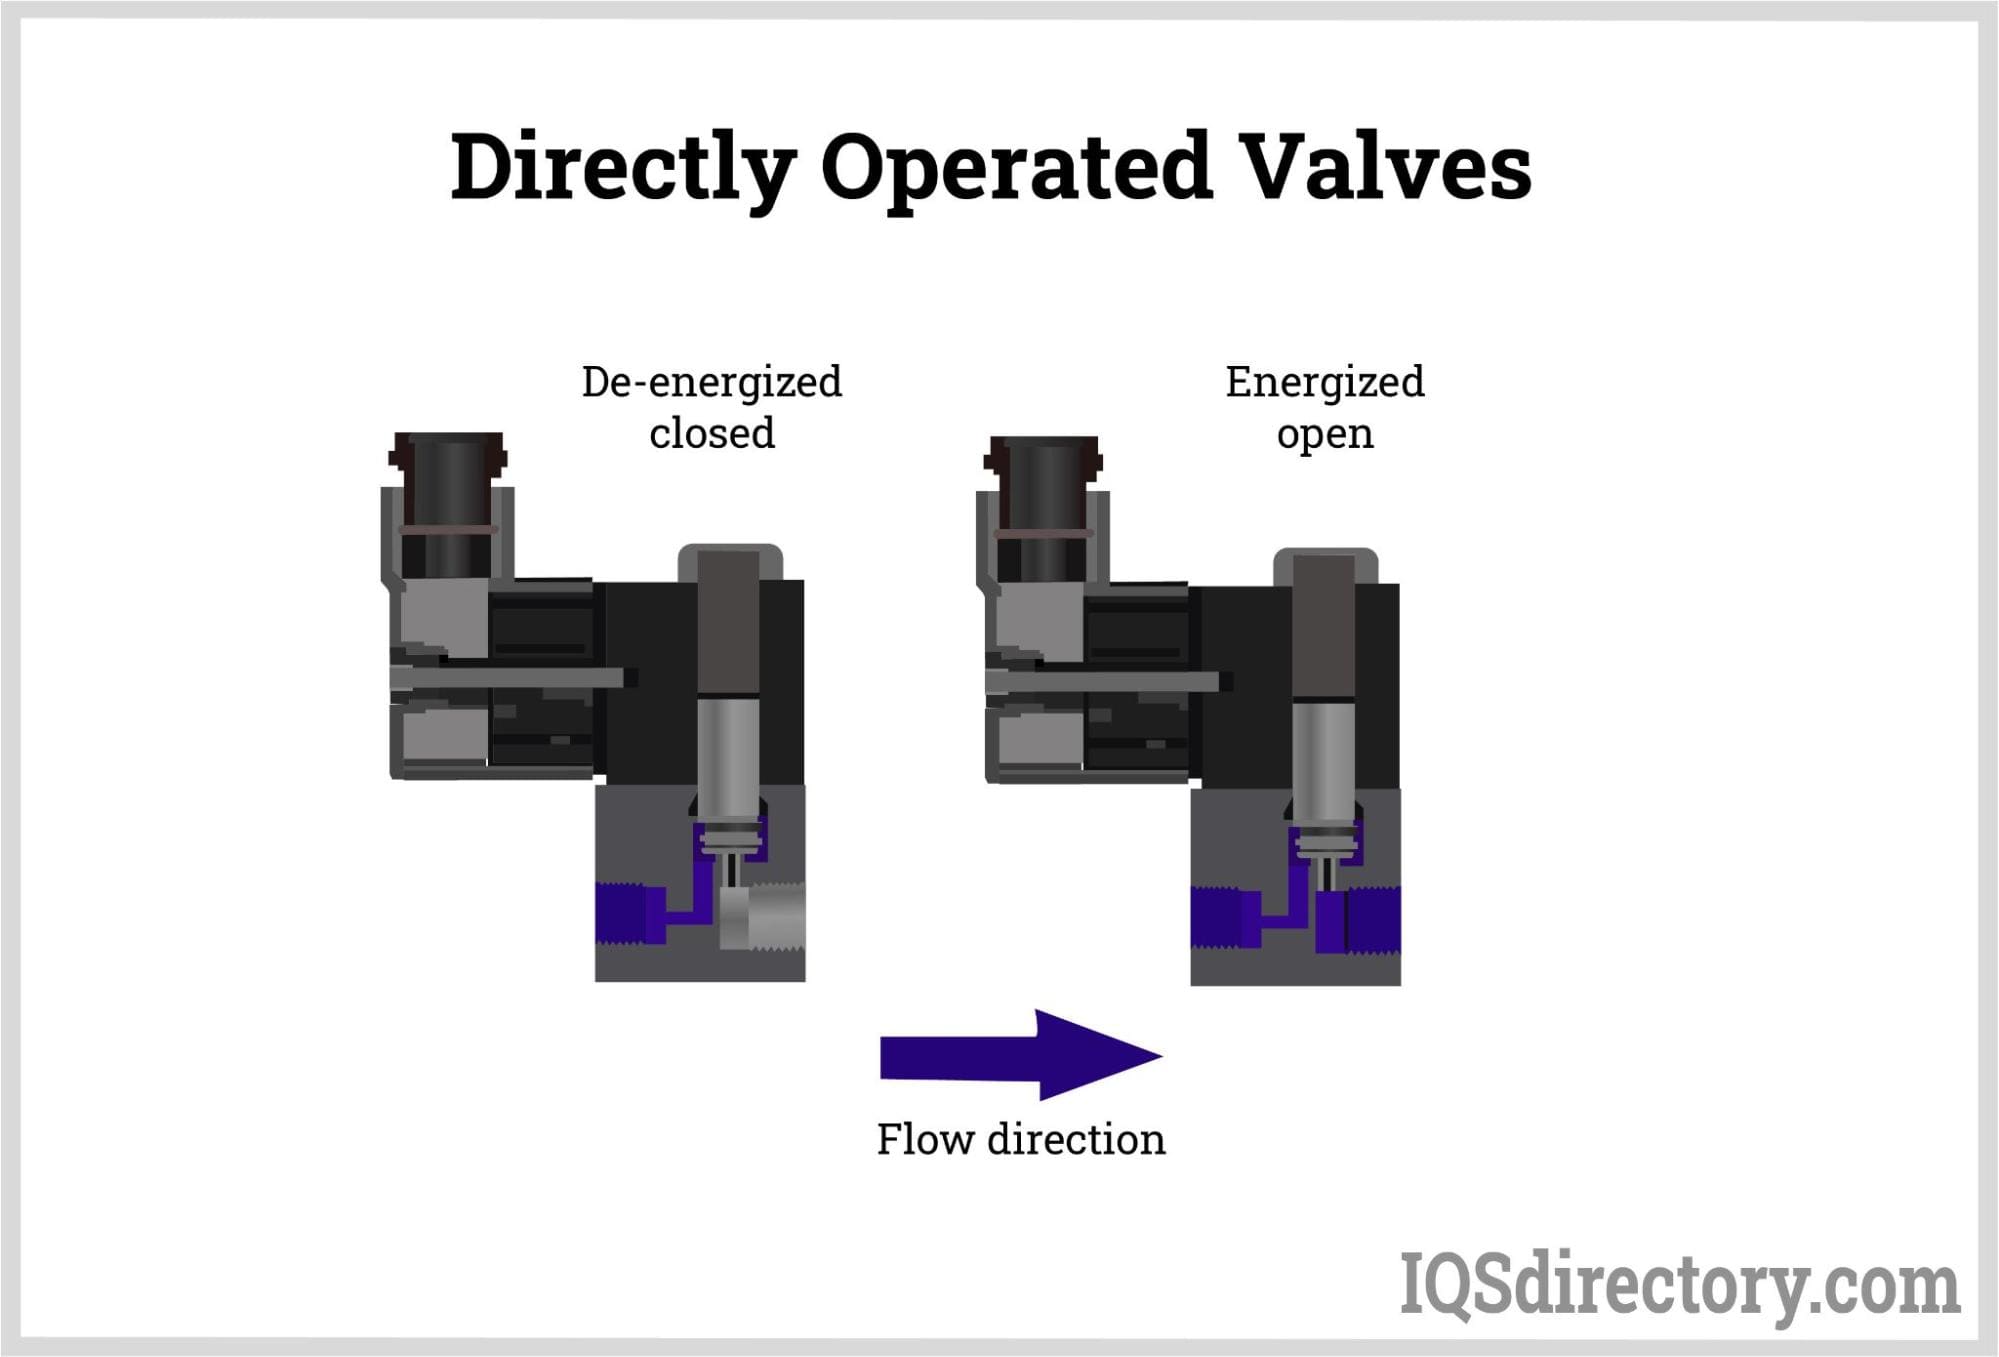 Directly Operated Valves